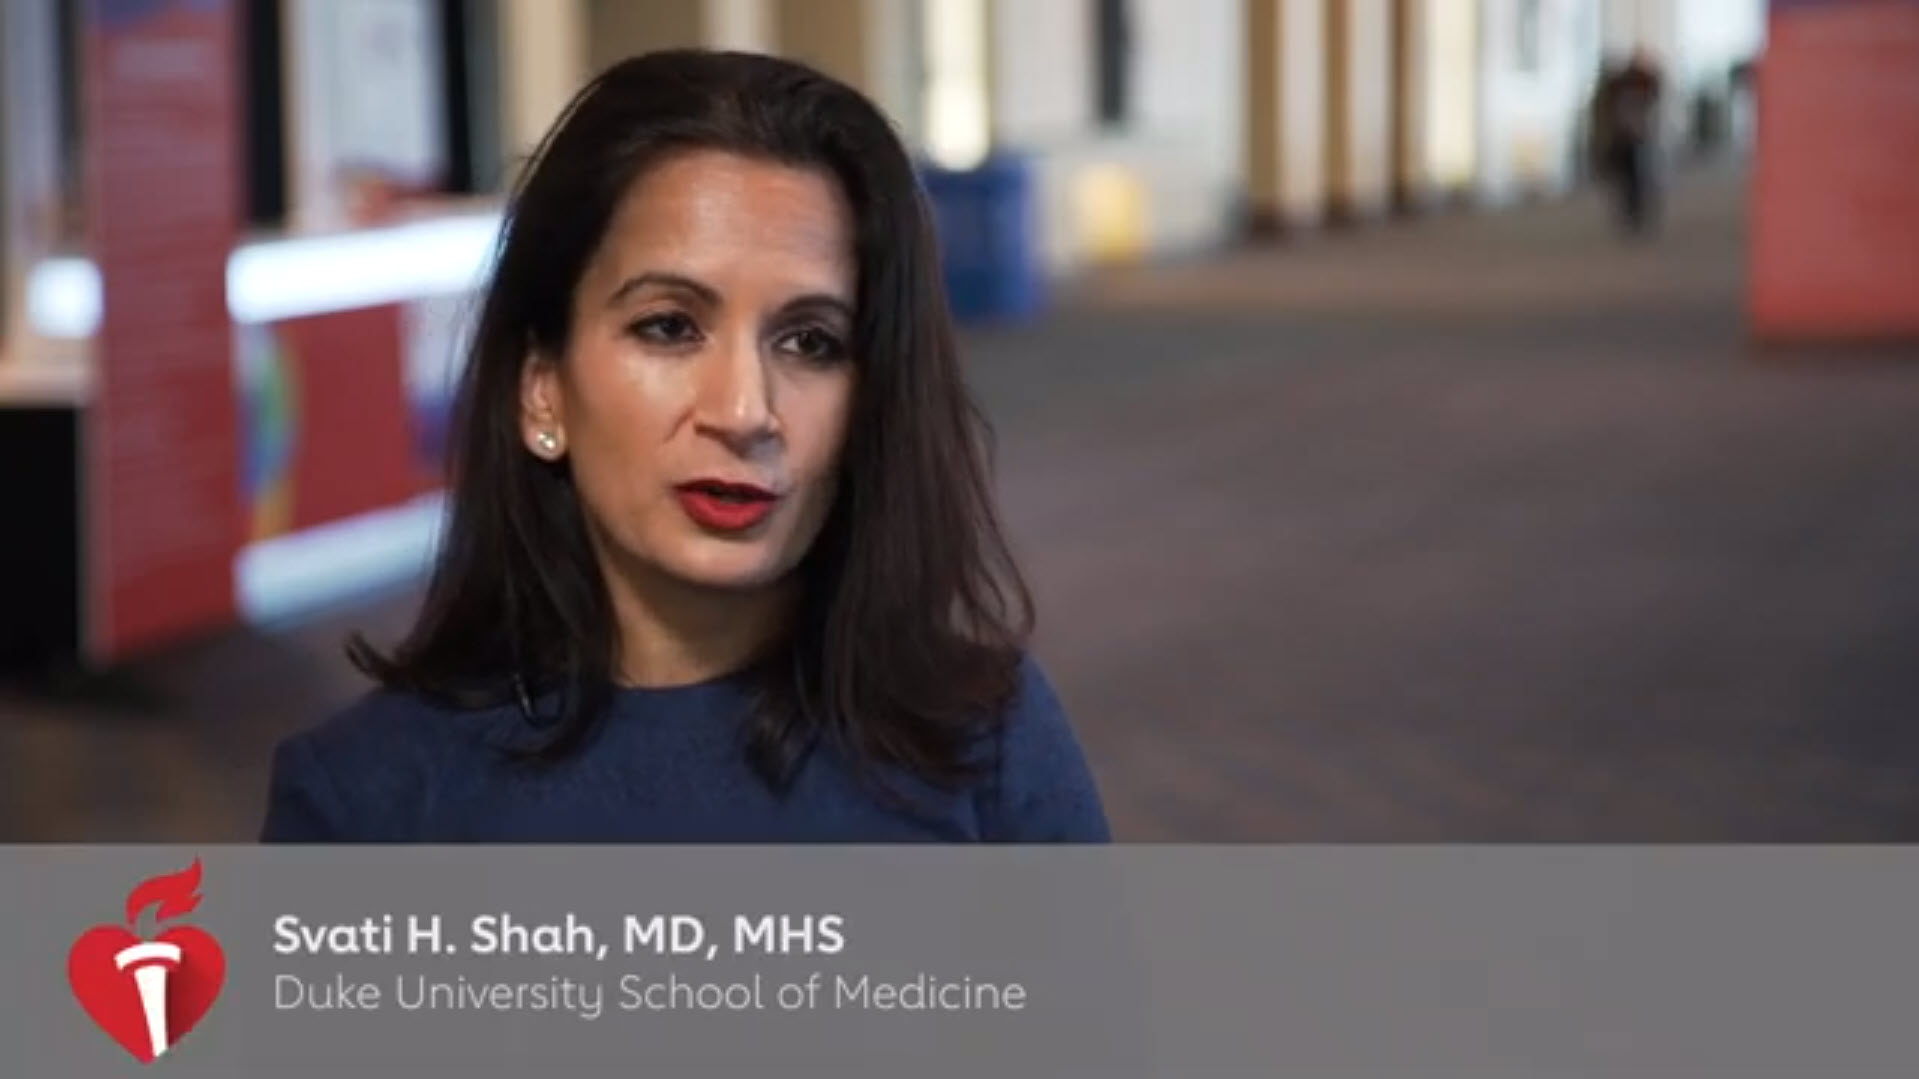 Svati Shah, MD, MHS comments on the results of BETonMACE, which were presented during Scientific Sessions 2019.